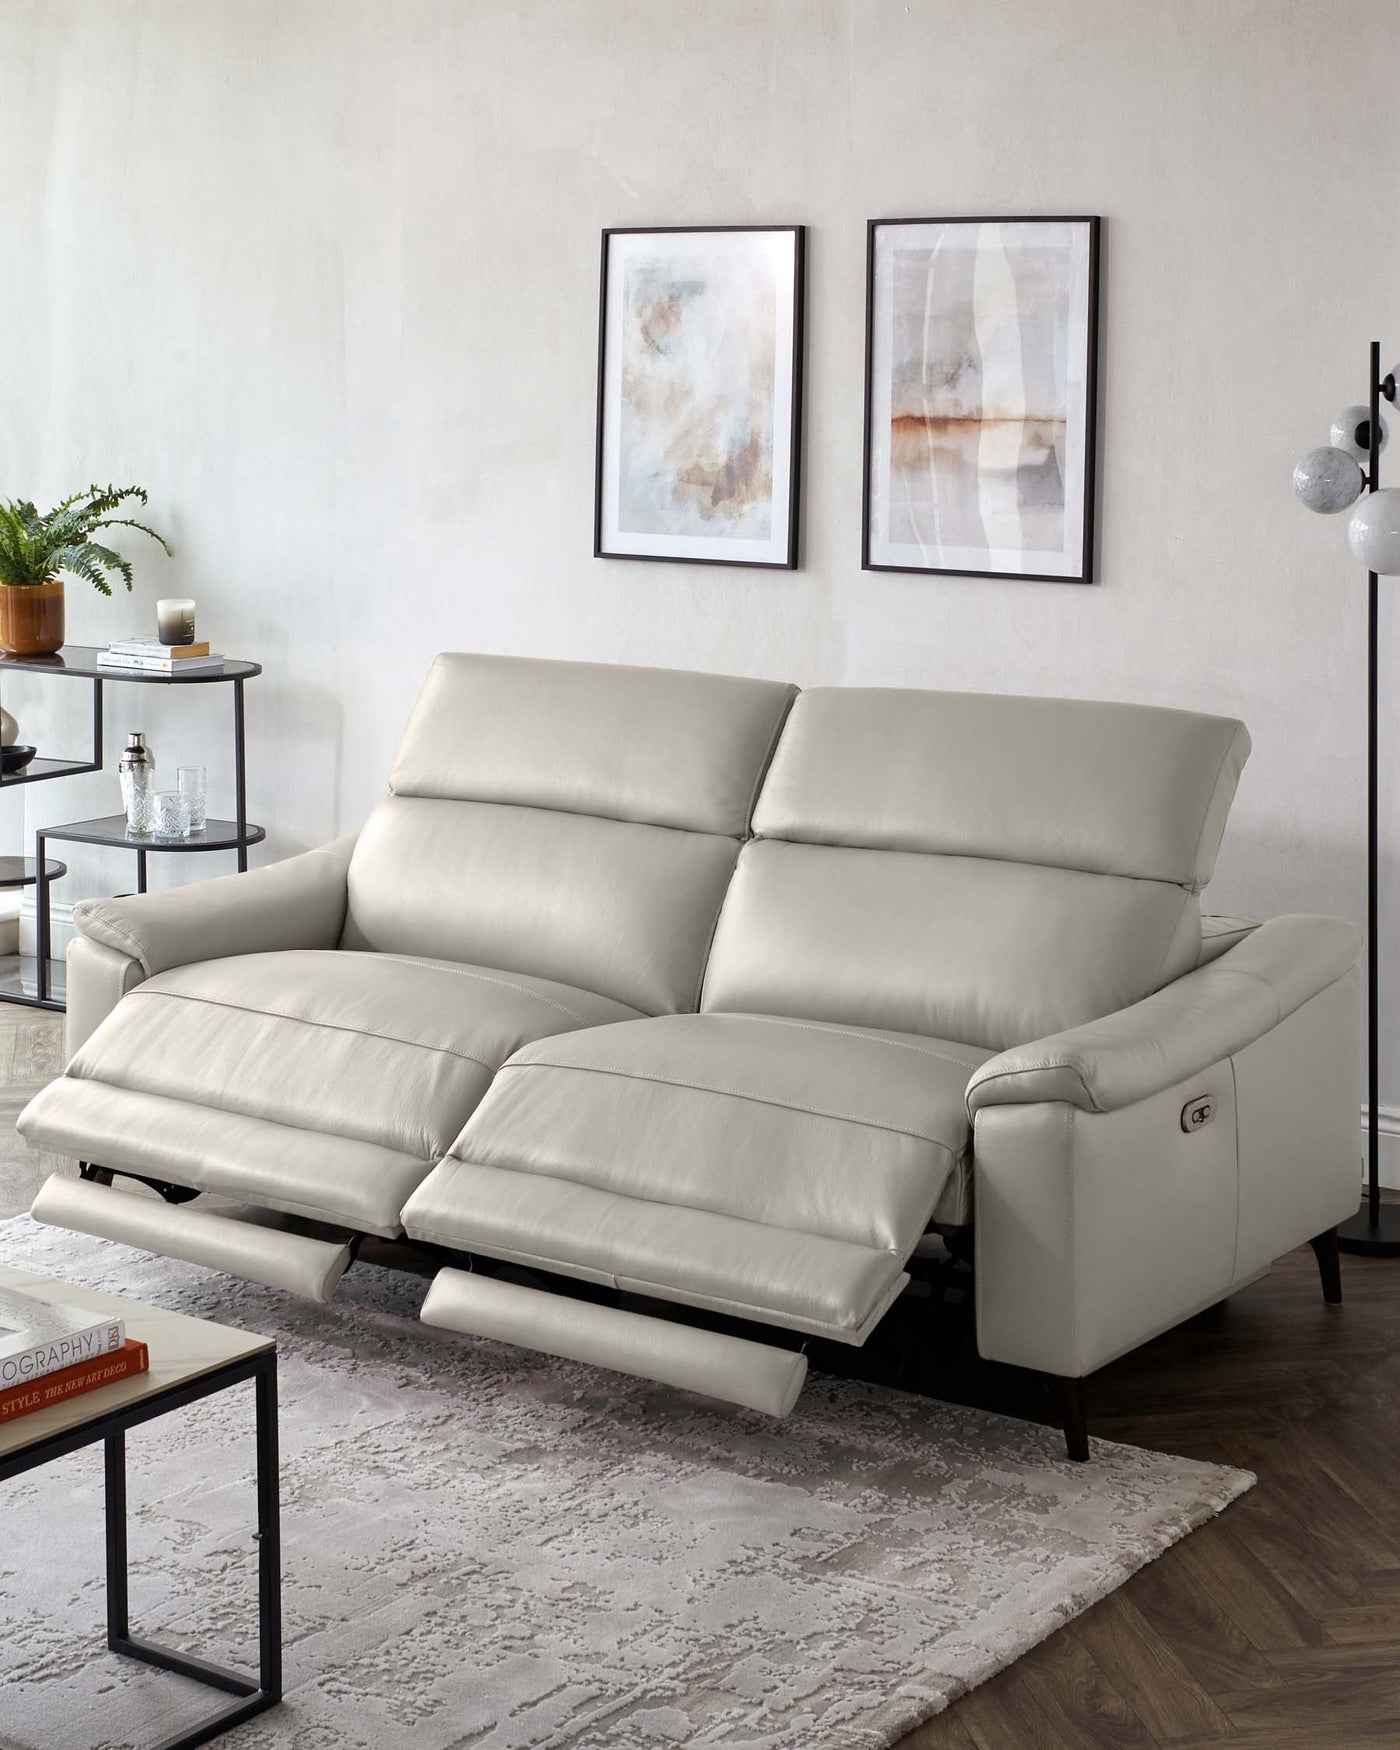 Modern light grey leather sectional sofa with reclining footrests, featuring sleek lines and a minimalist design. A slim black metal and glass side table is positioned adjacent to it.